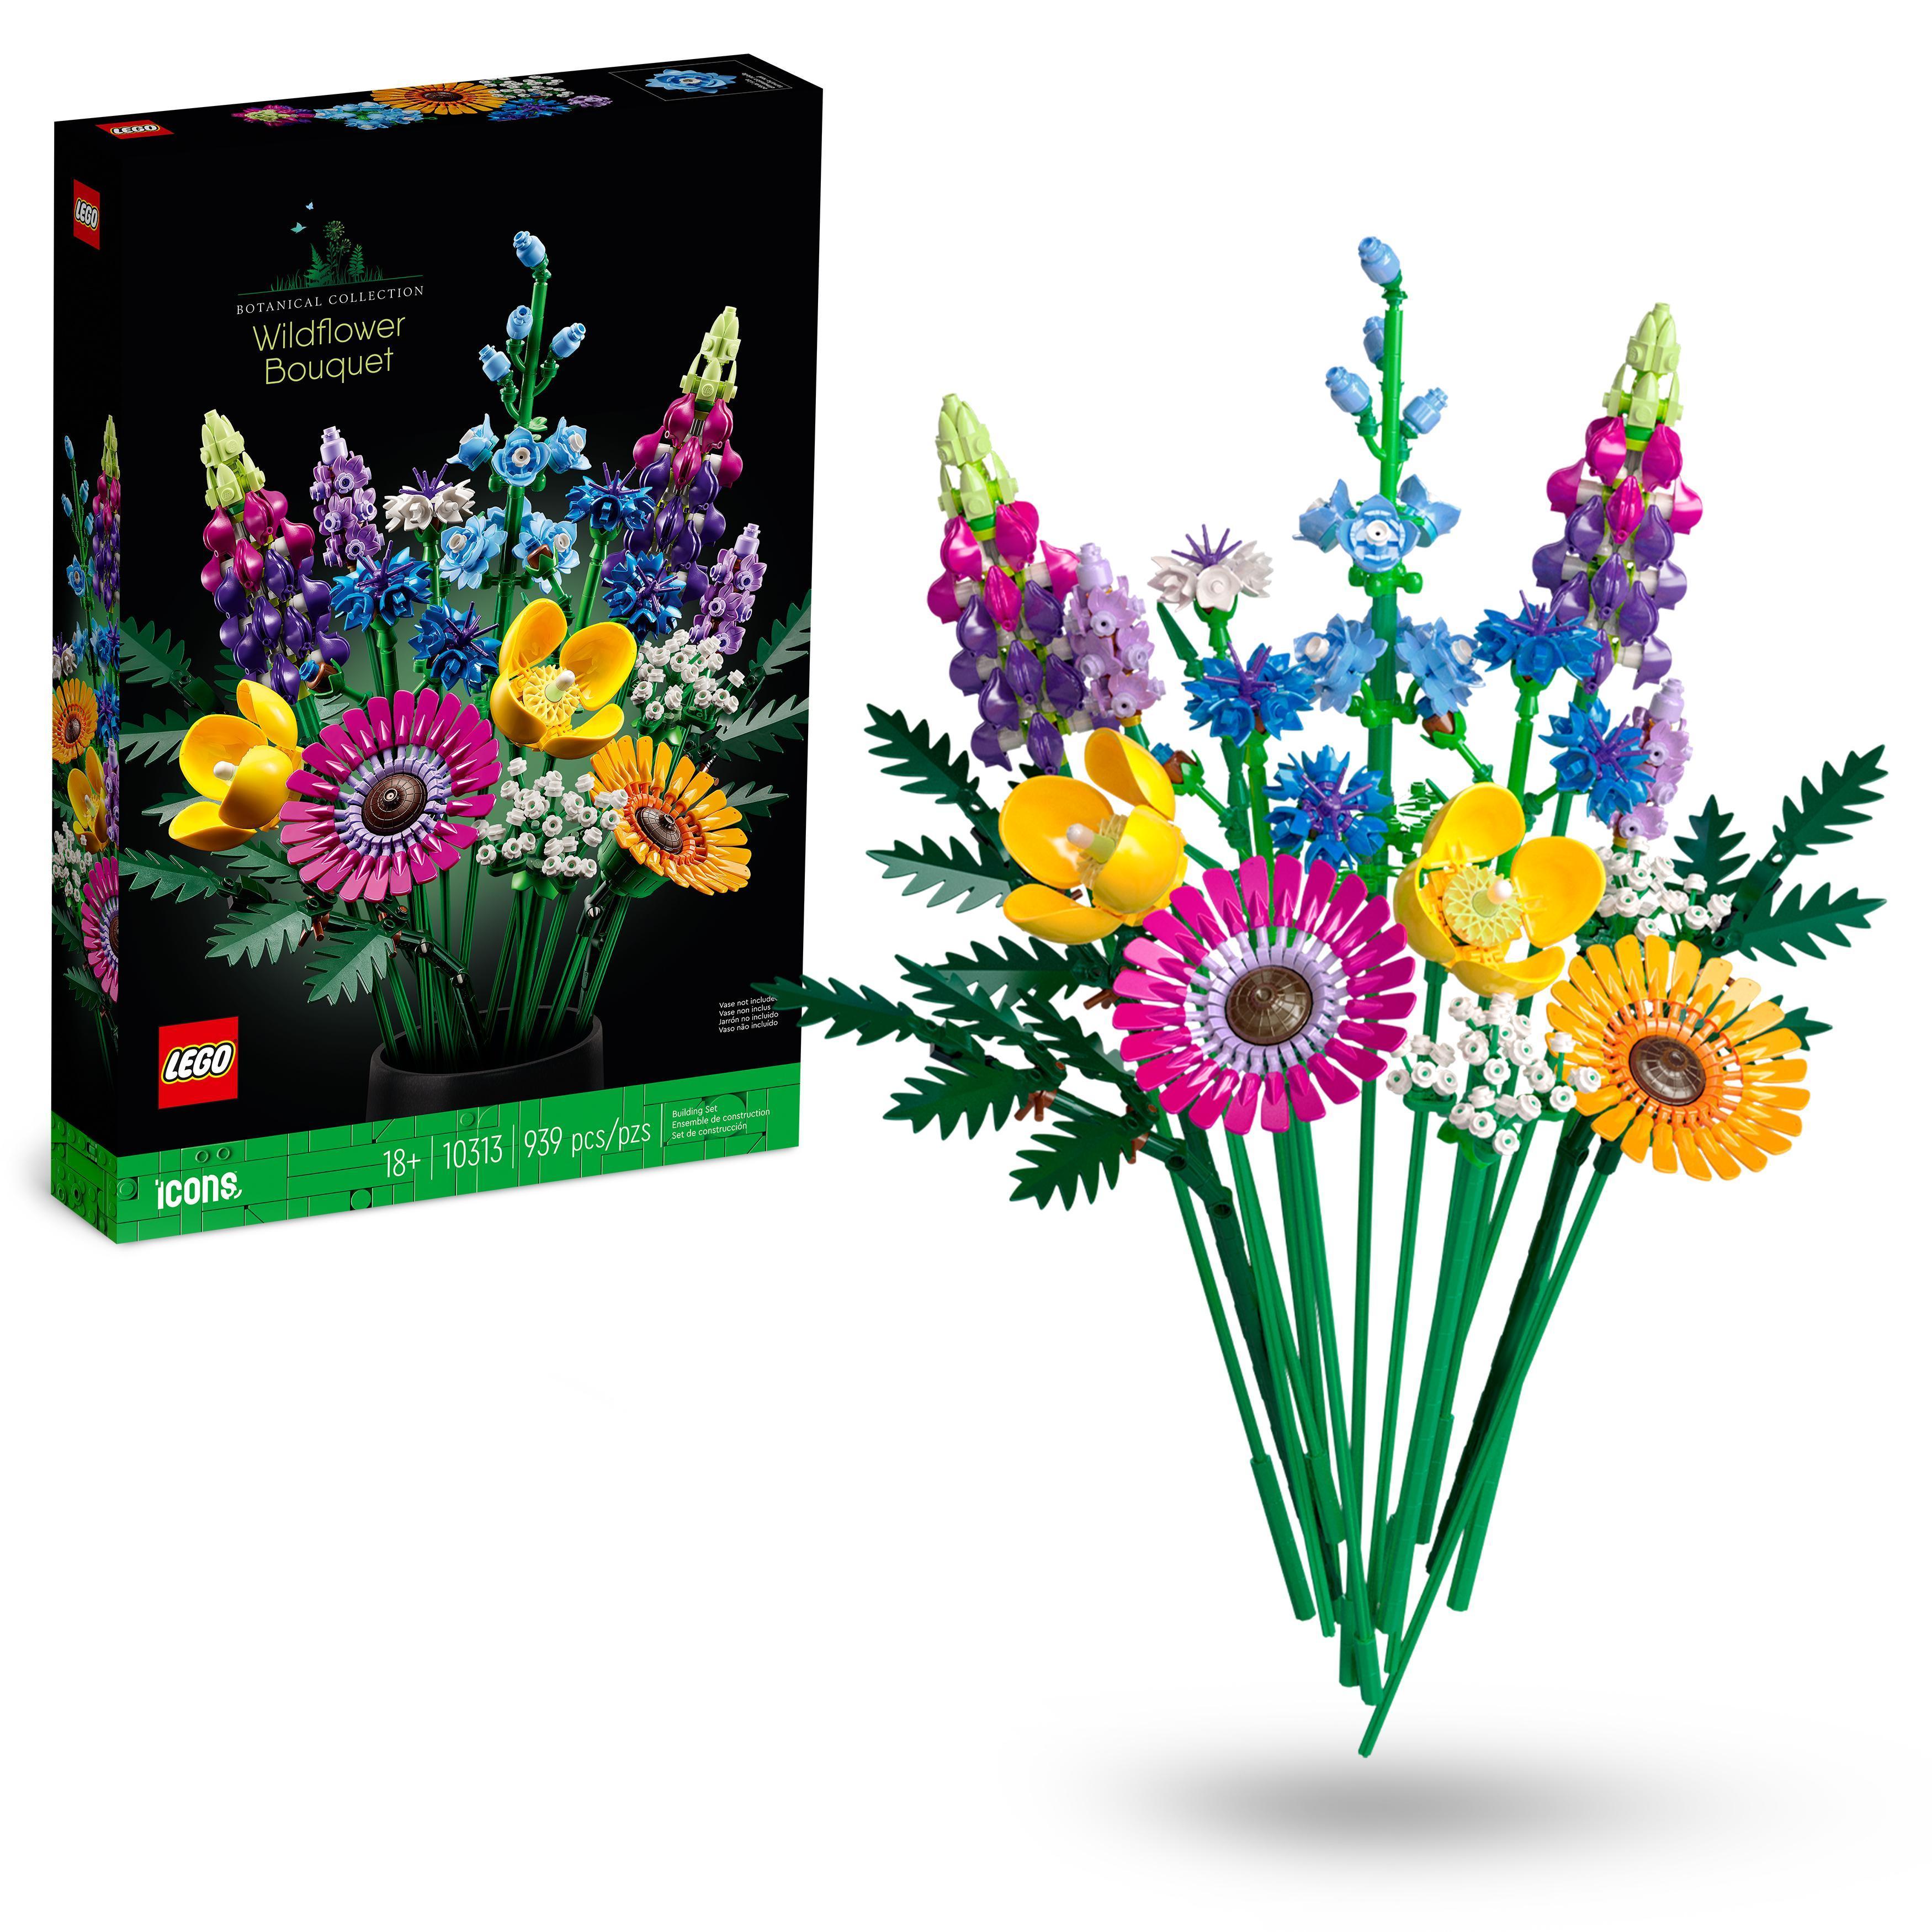 Flower Arrangement and Vase made out of LEGO